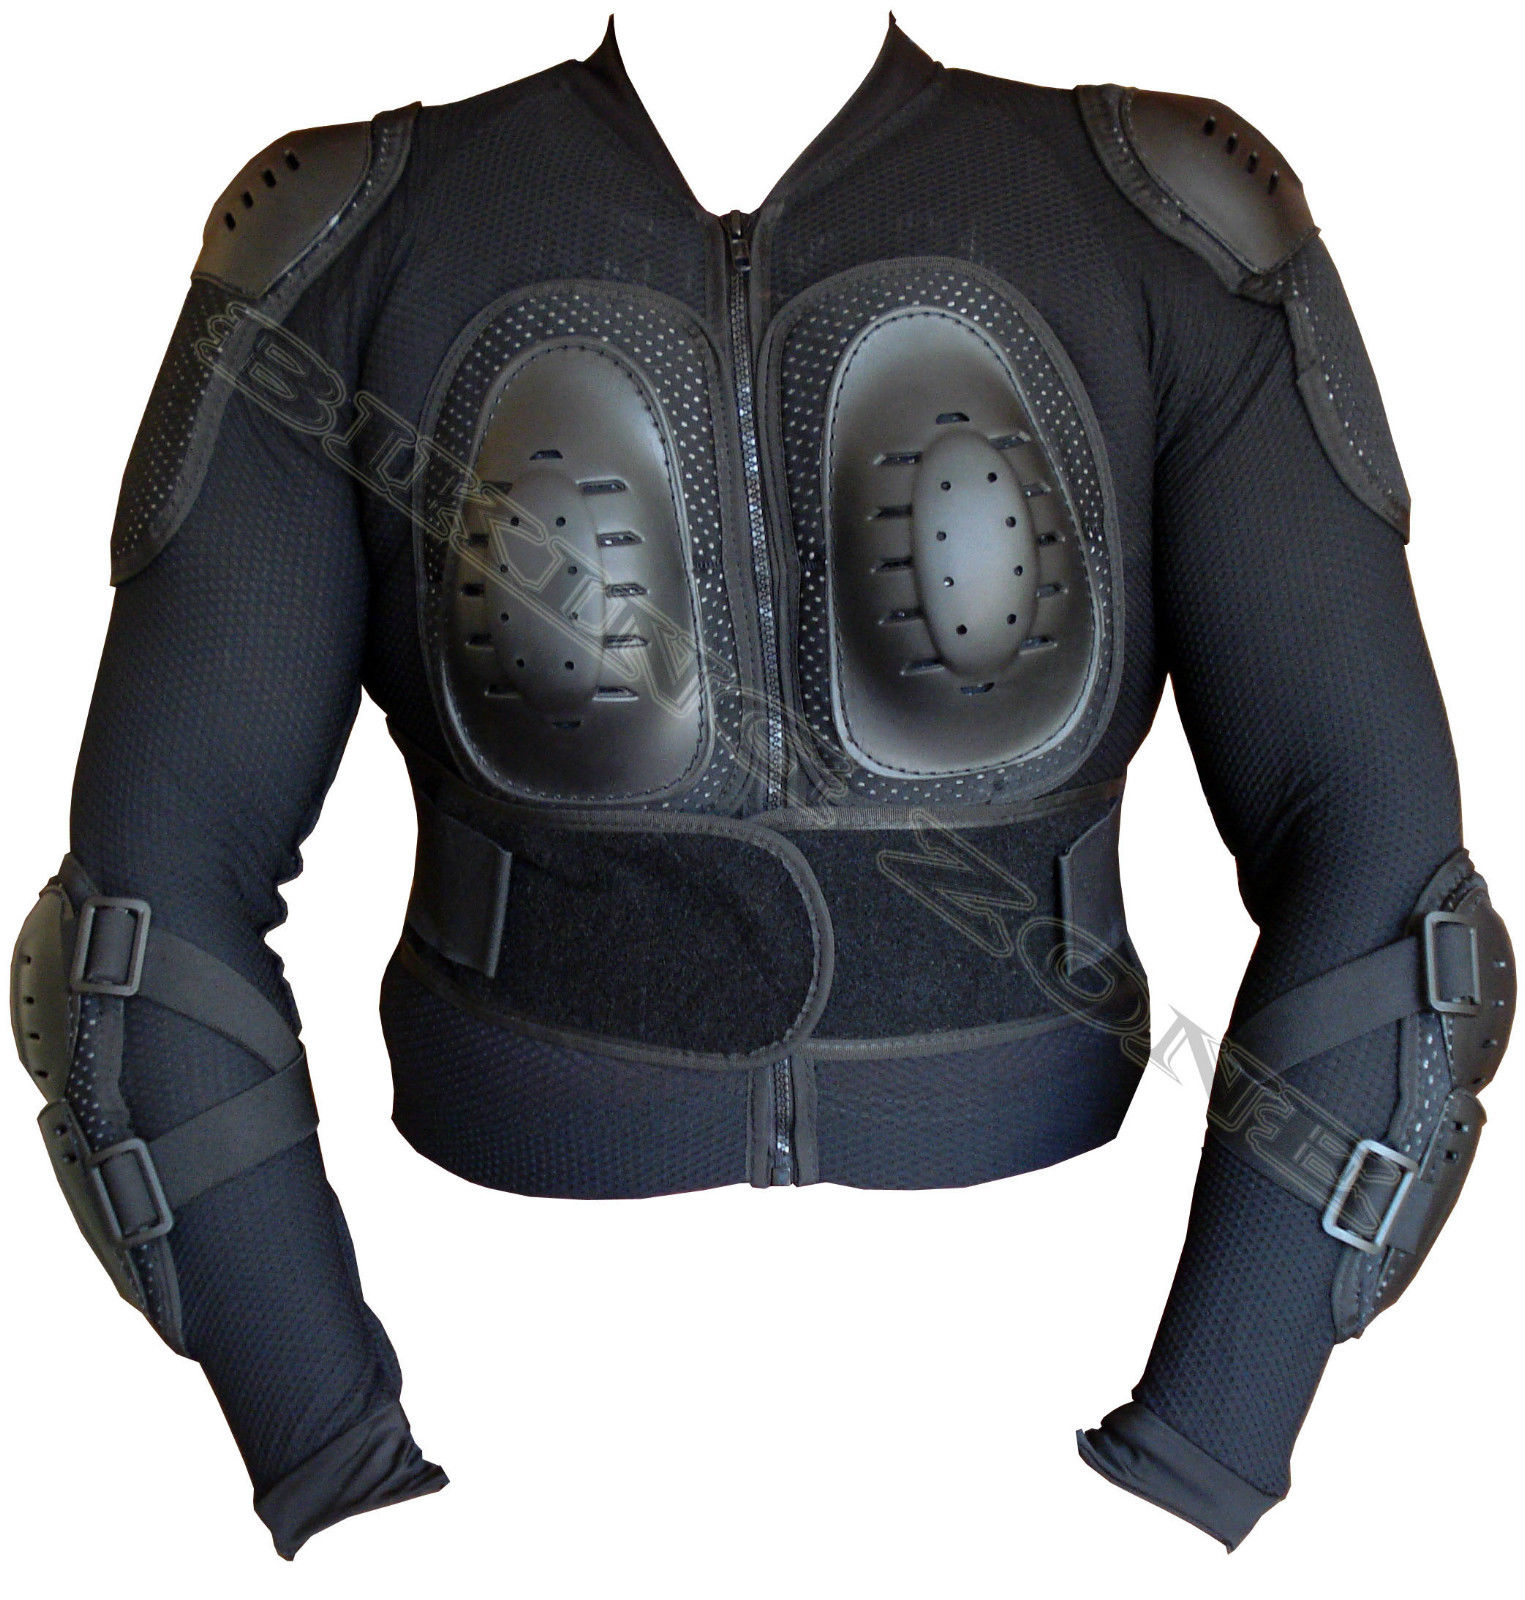 LADIES SPINE CHEST GUARD BODY ARMOUR